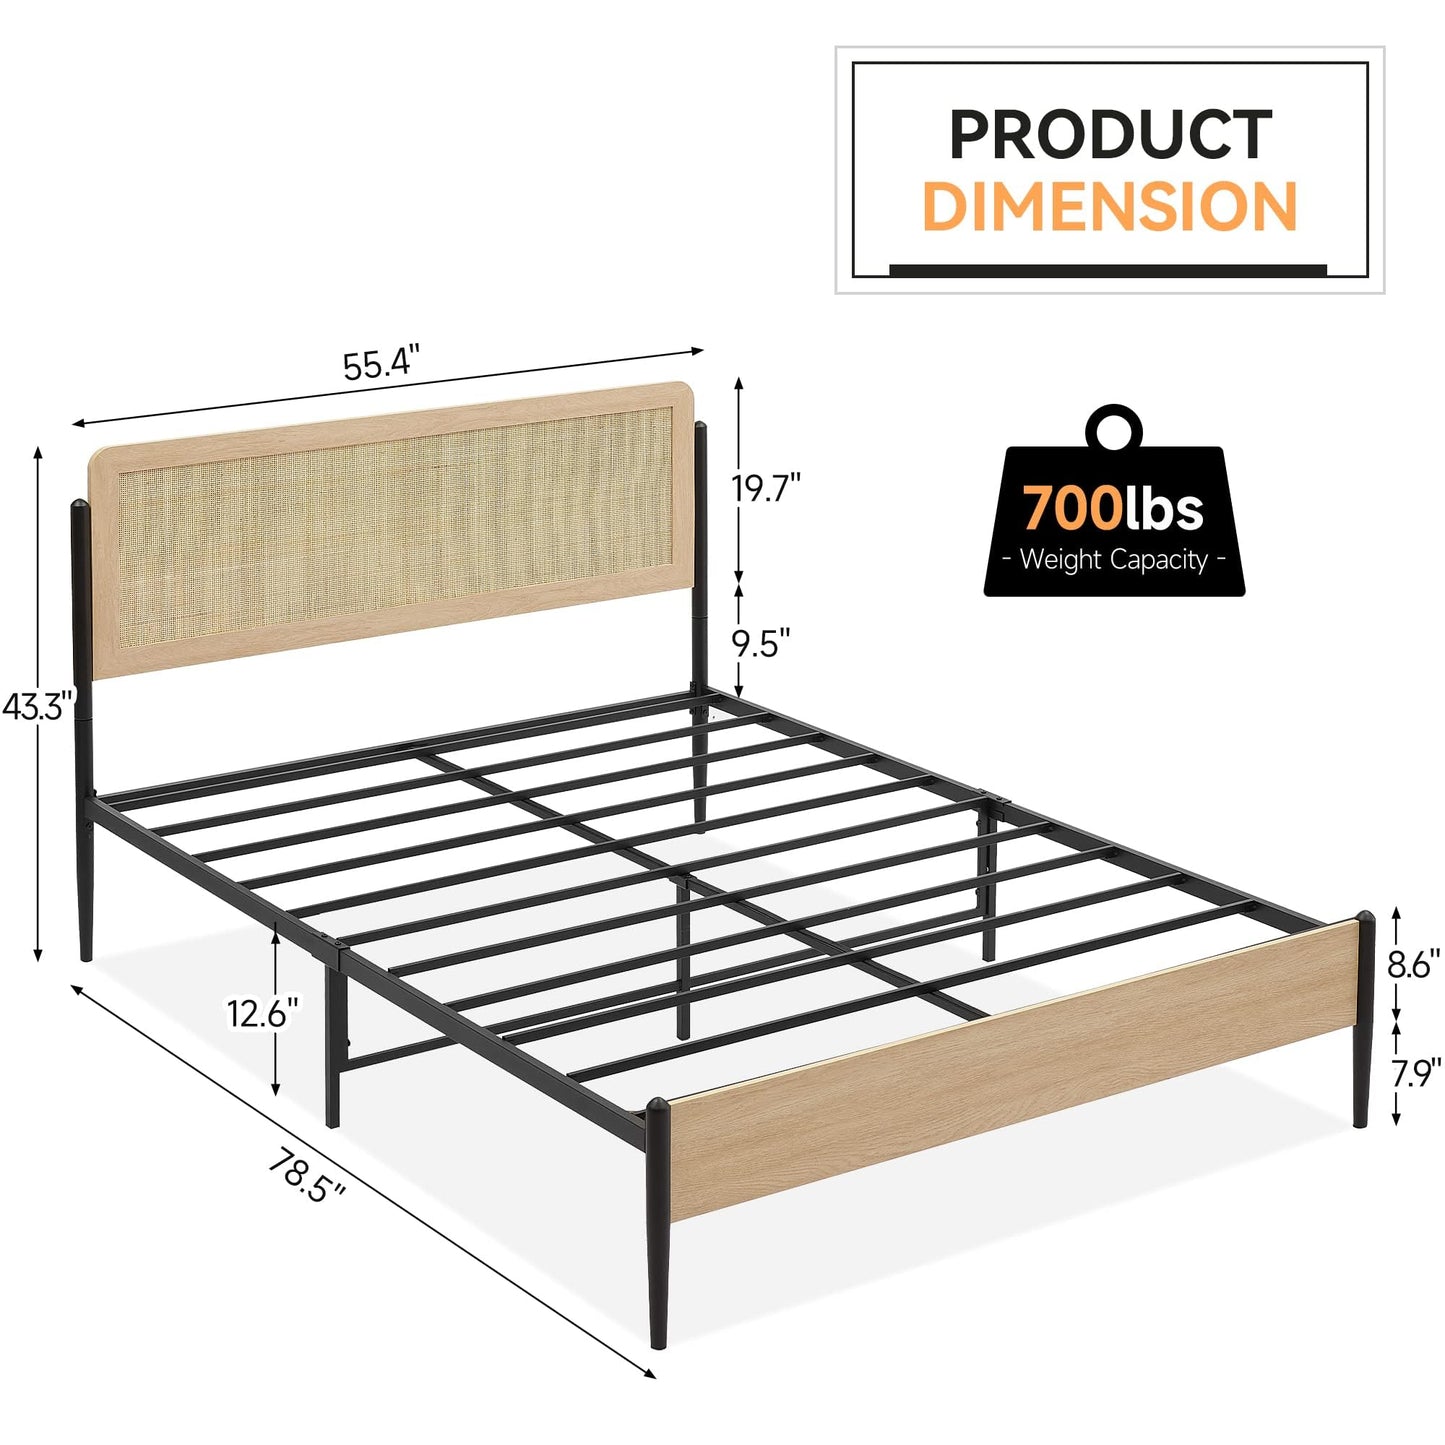 GAOMON Full Metal Bed Frame with Curved Rattan Headboard and Wooden Footboard,Modern Platform Bed Frame with Underbed Storage Space,Noiseless,No